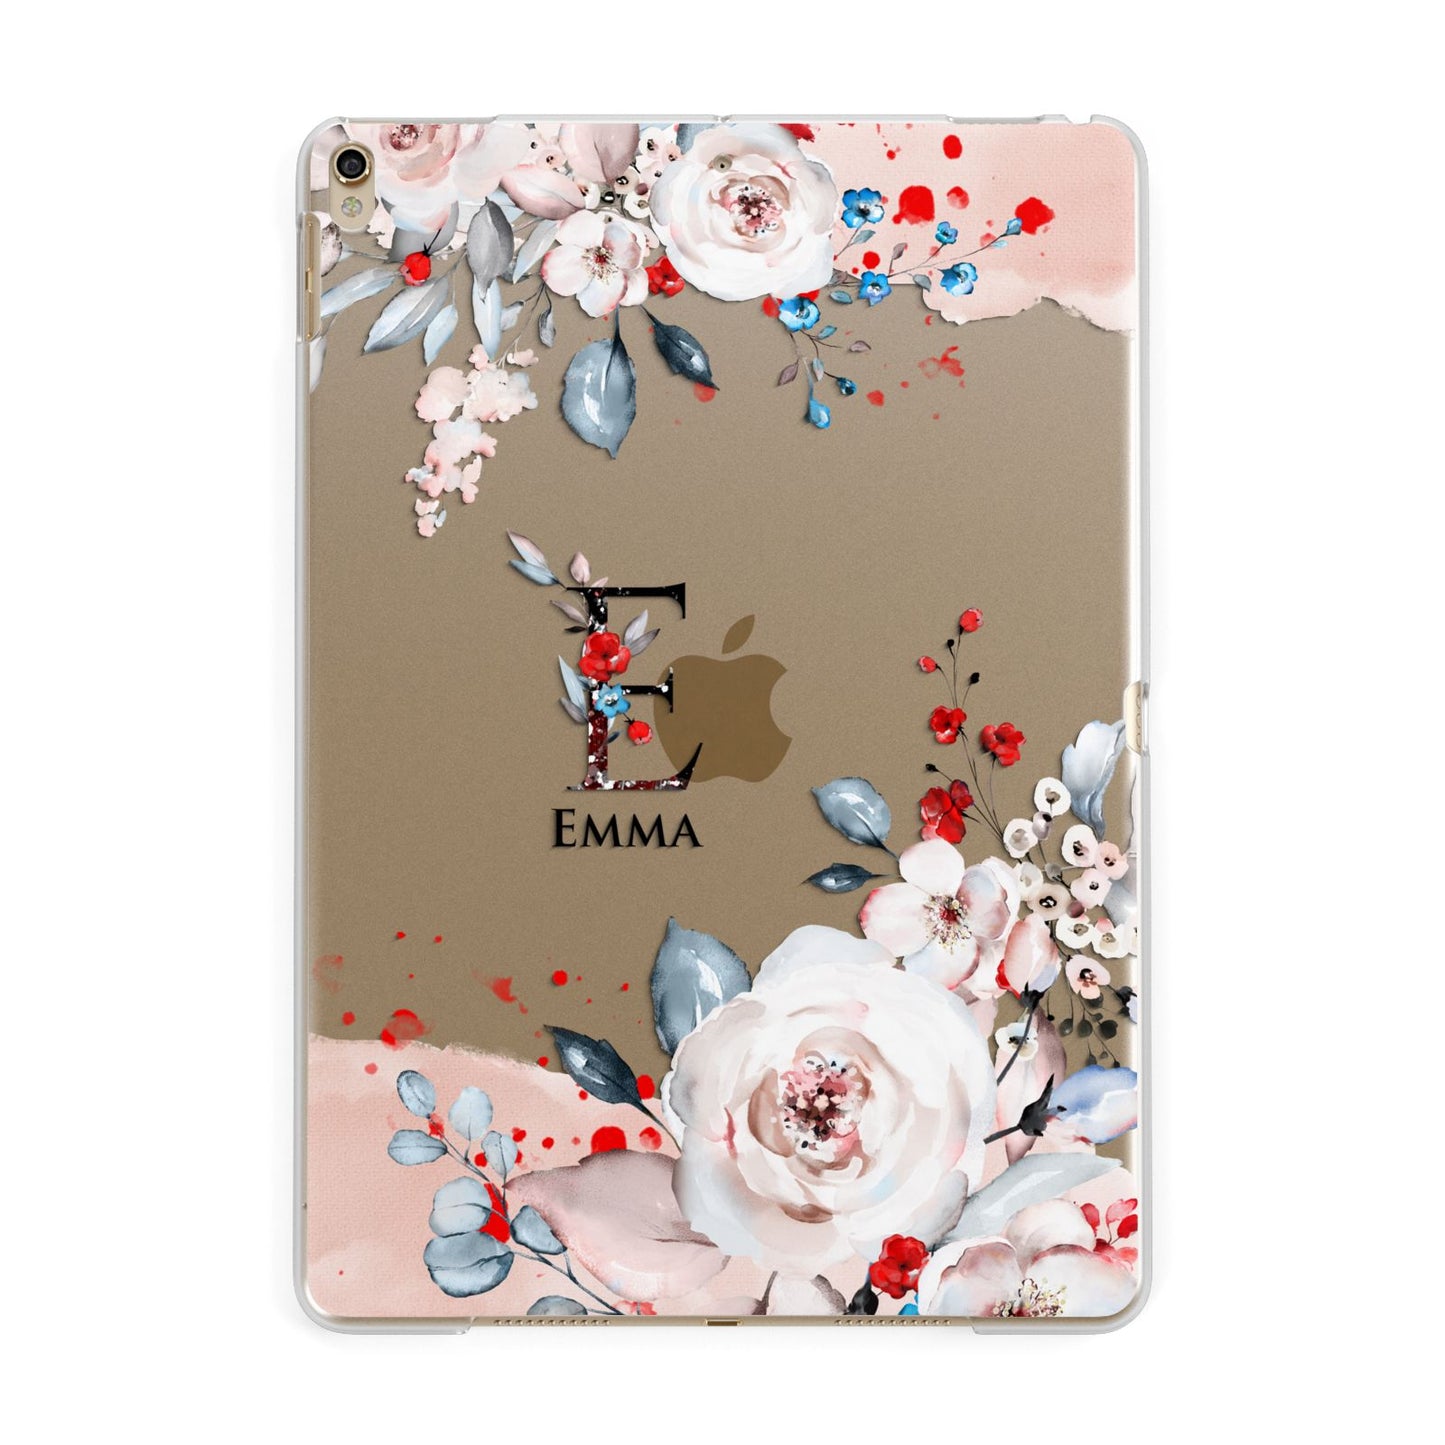 Monogrammed Roses Floral Wreath Apple iPad Gold Case